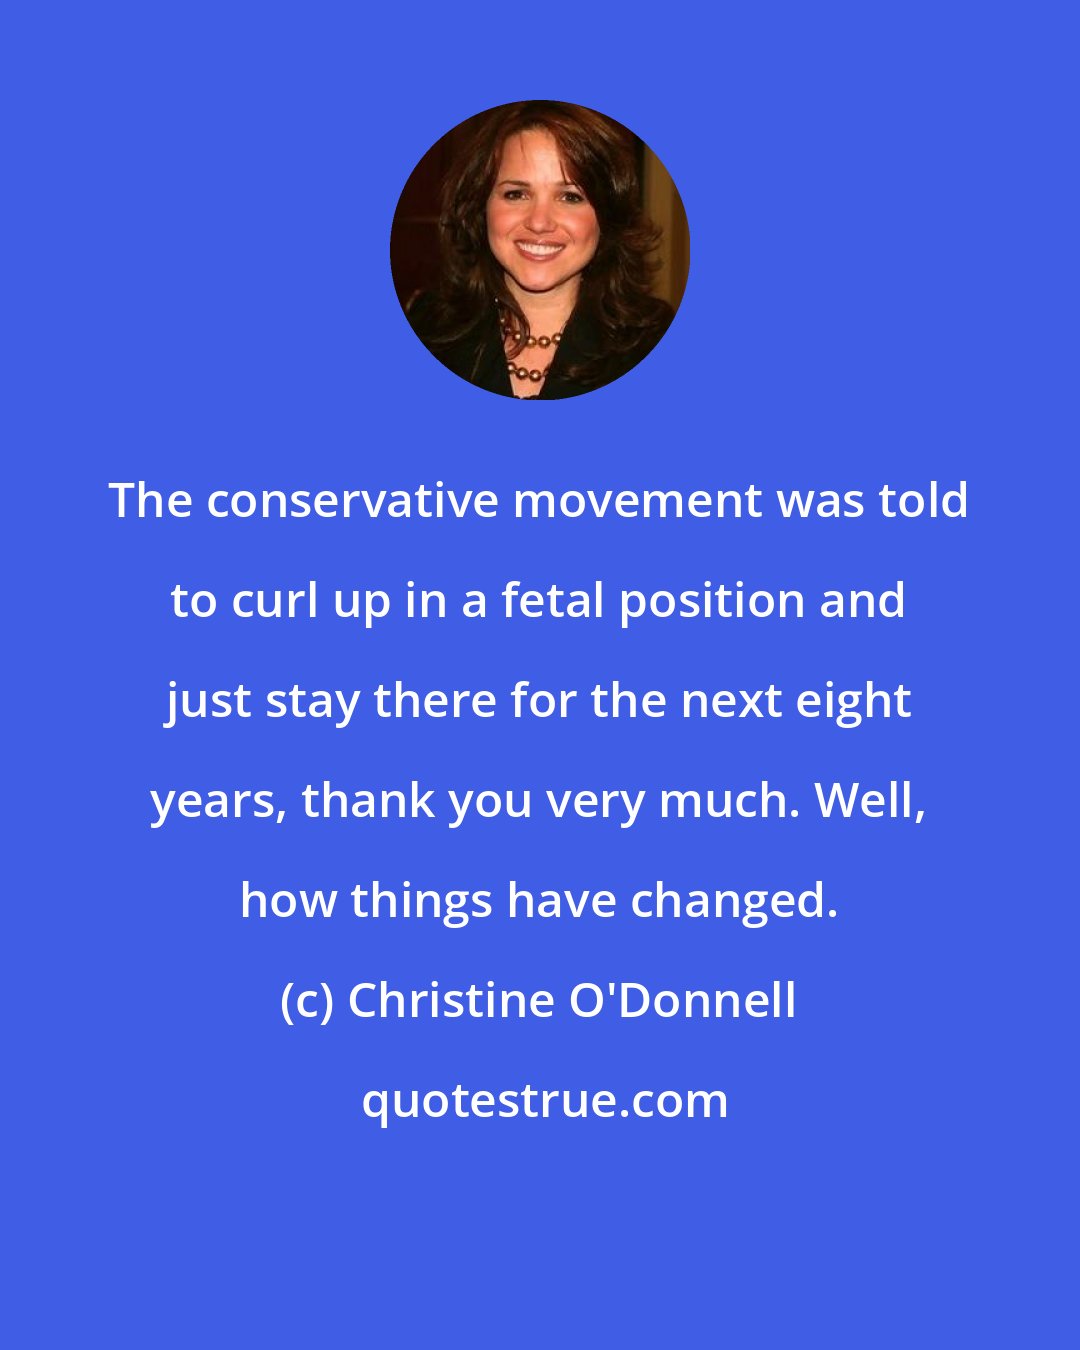 Christine O'Donnell: The conservative movement was told to curl up in a fetal position and just stay there for the next eight years, thank you very much. Well, how things have changed.